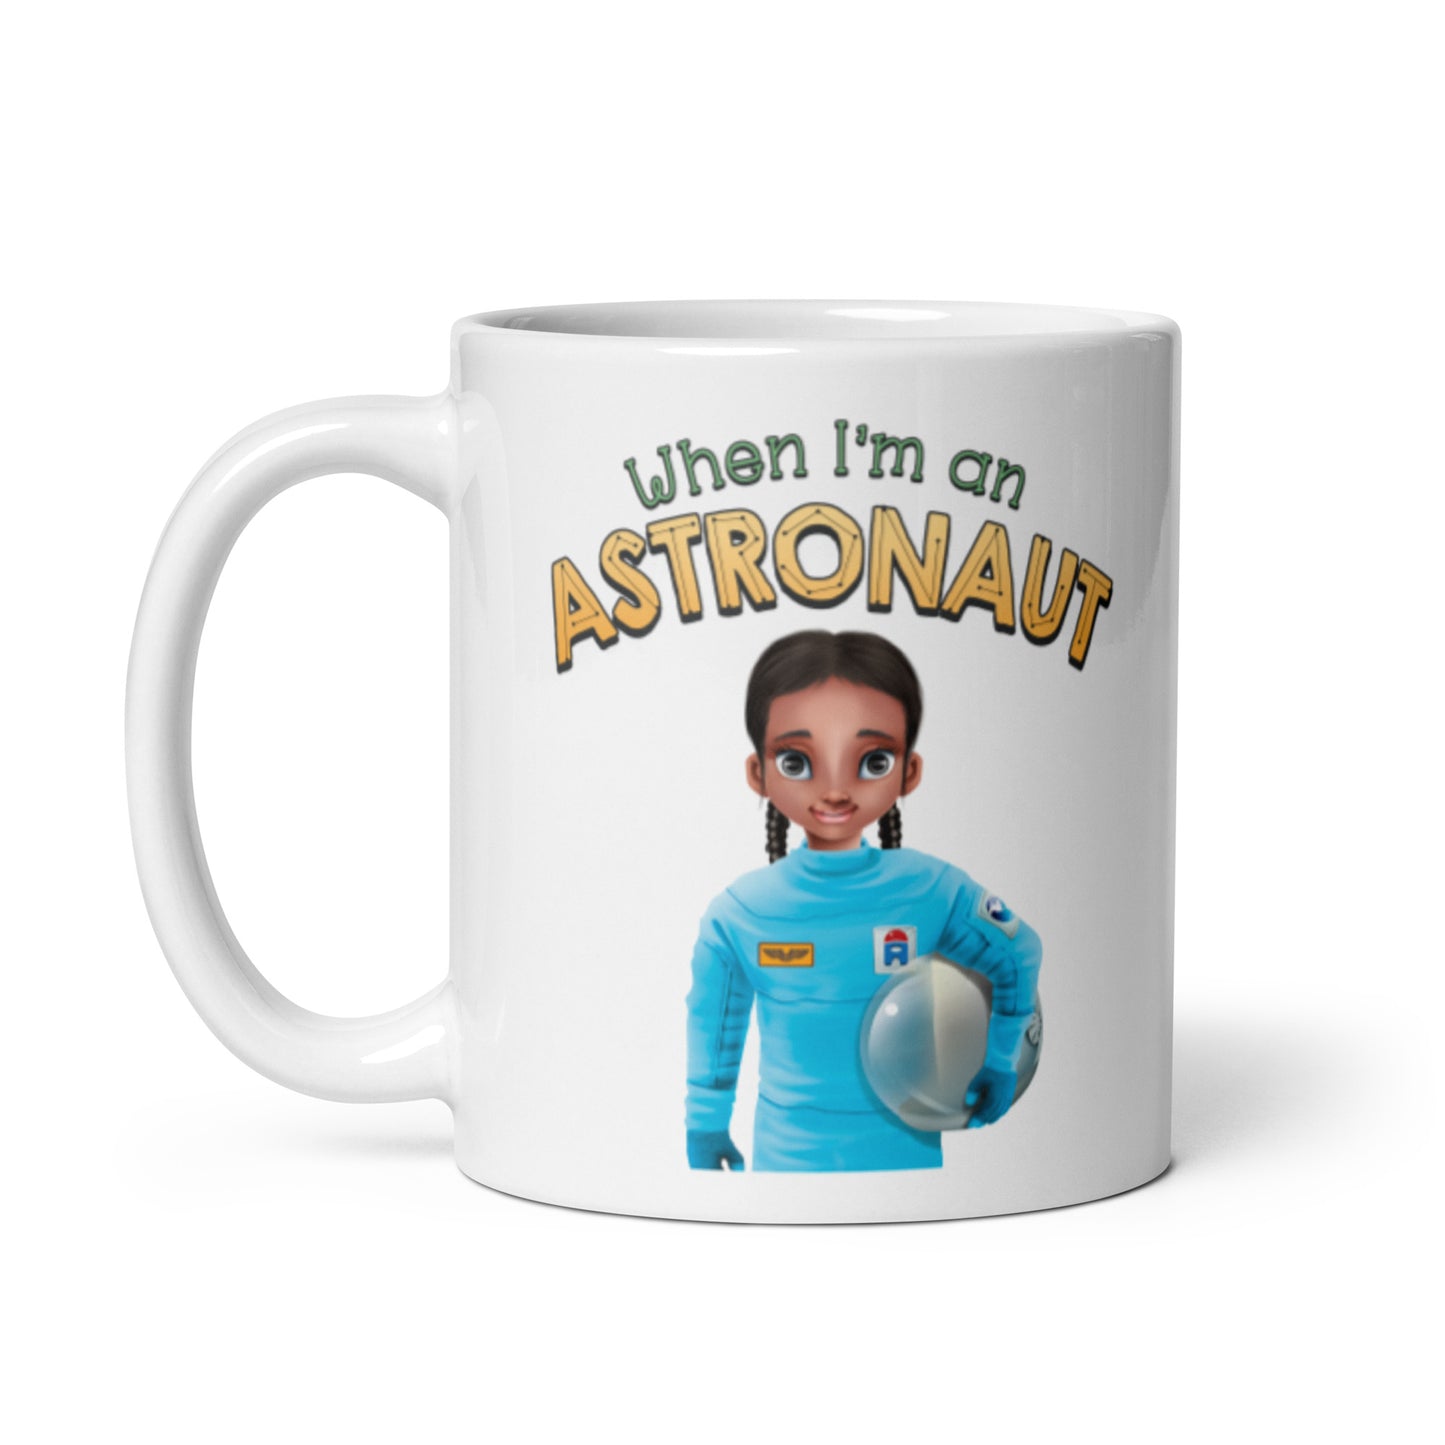 Inspirational mugs are one of our best gift options.